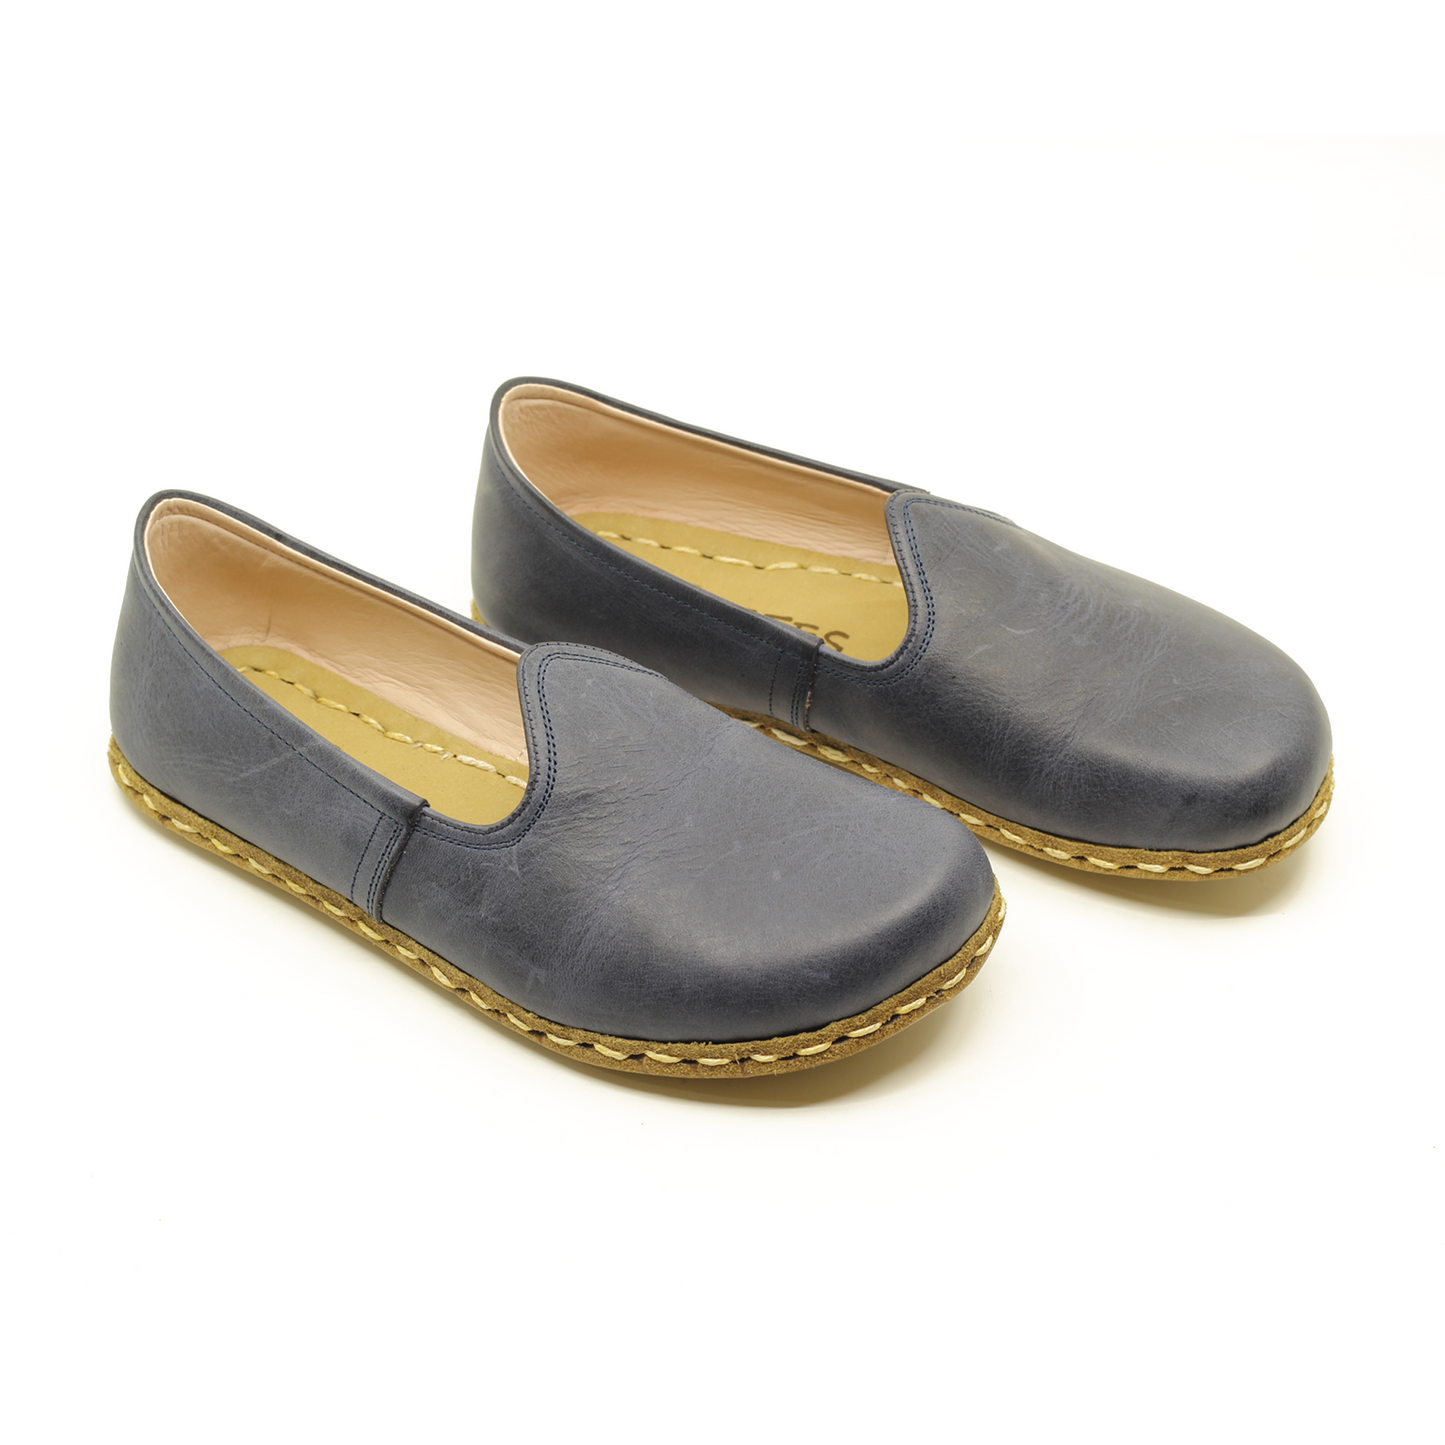 Handmade Women's Shoes: Navy Blue Genuine Leather with Wide Front and Buffalo Leather Sole - Made in Turkey